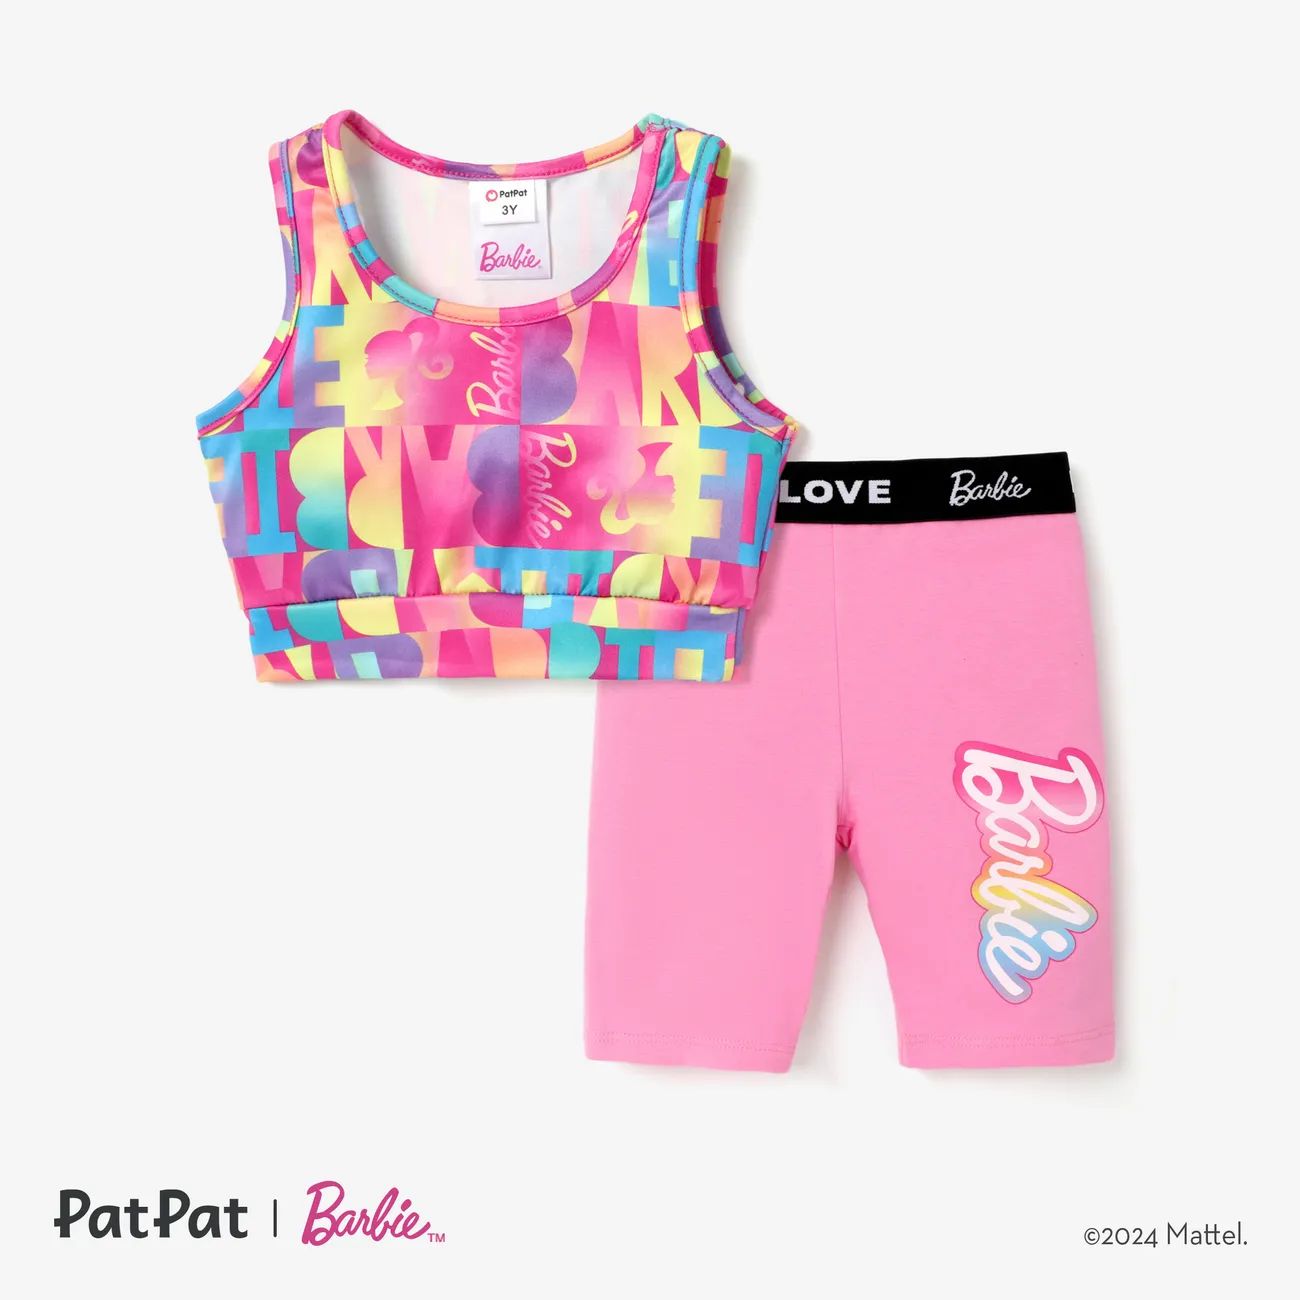 Barbie 2pcs Sporty Sets for Toddler/Kid Girls with Letter Pattern | PatPat